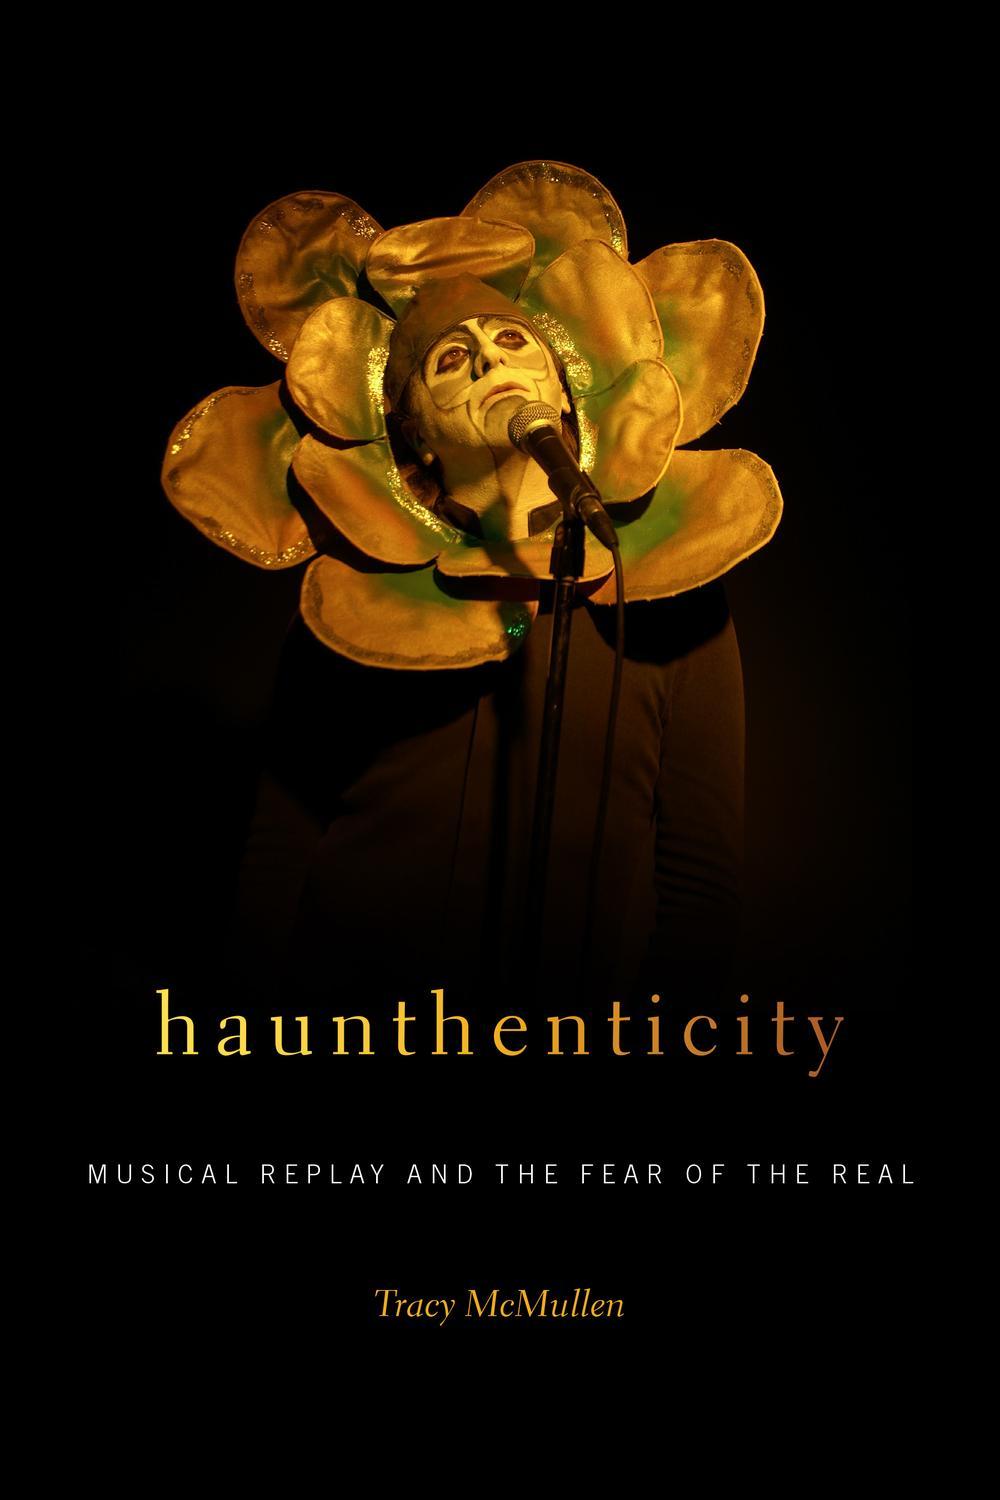 Haunthenticity - Tracy McMullen